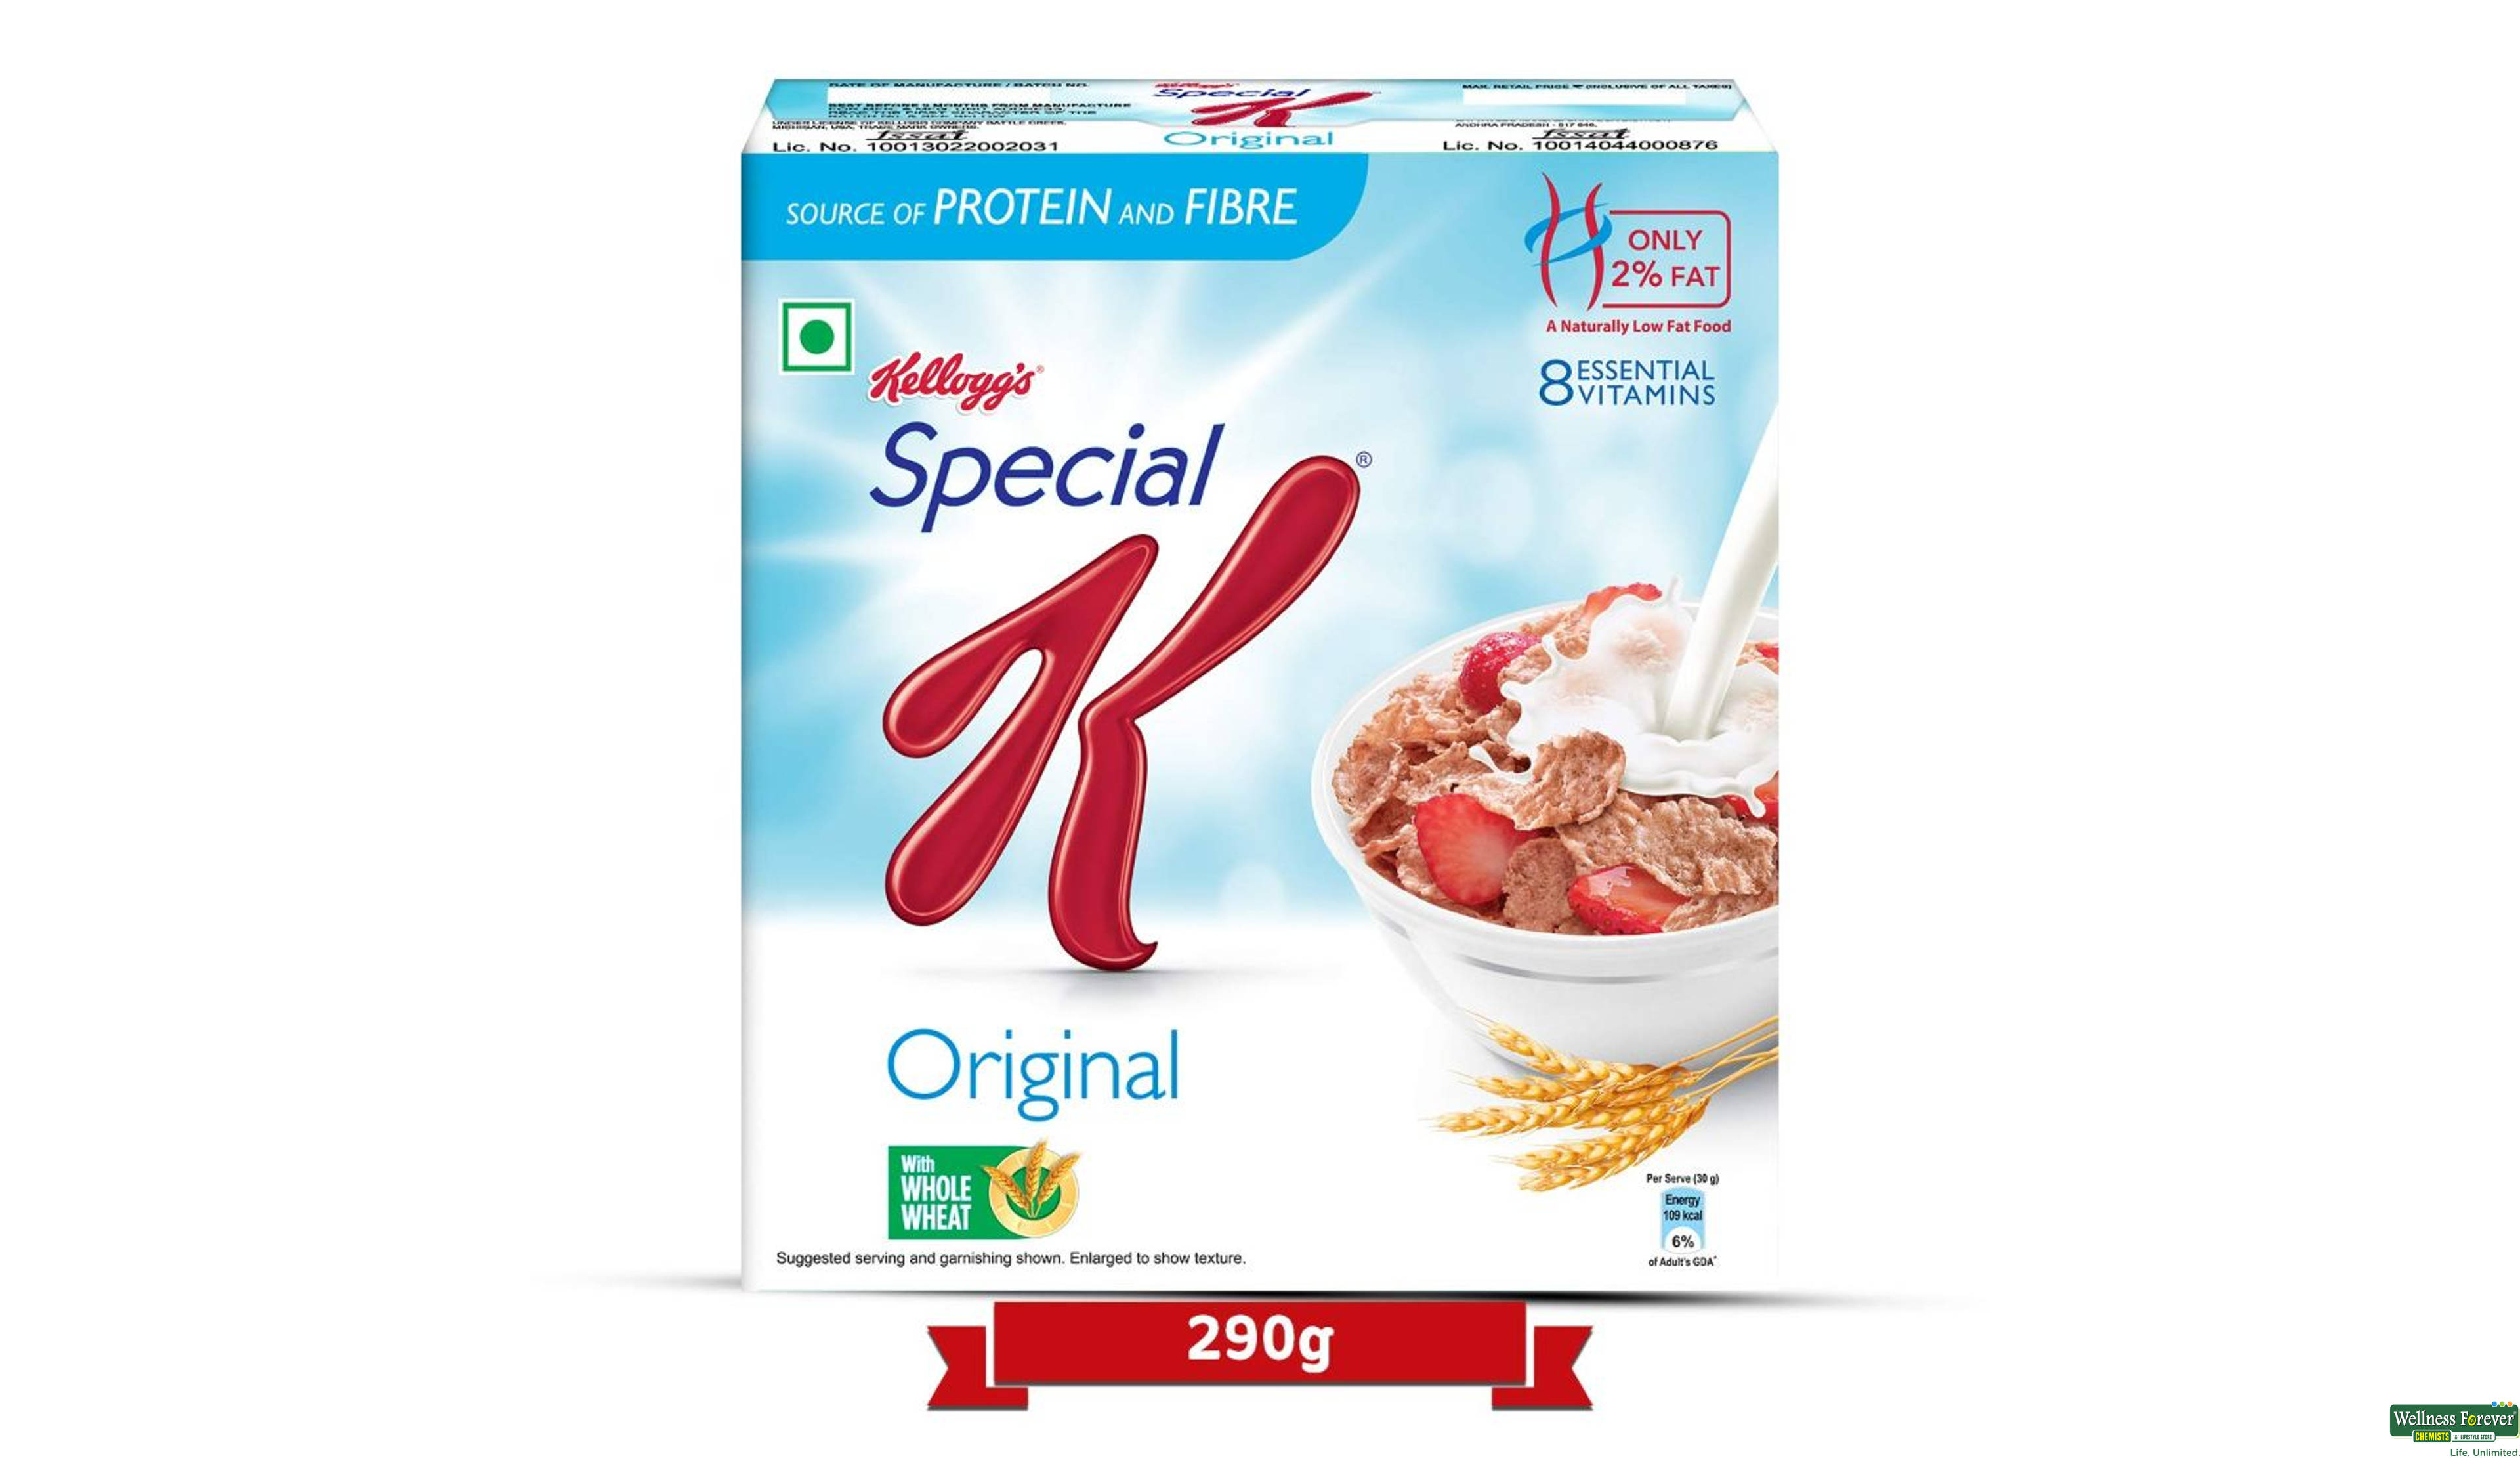 KELL CEREAL K SPECIAL 290GM- 1, 290GM, 